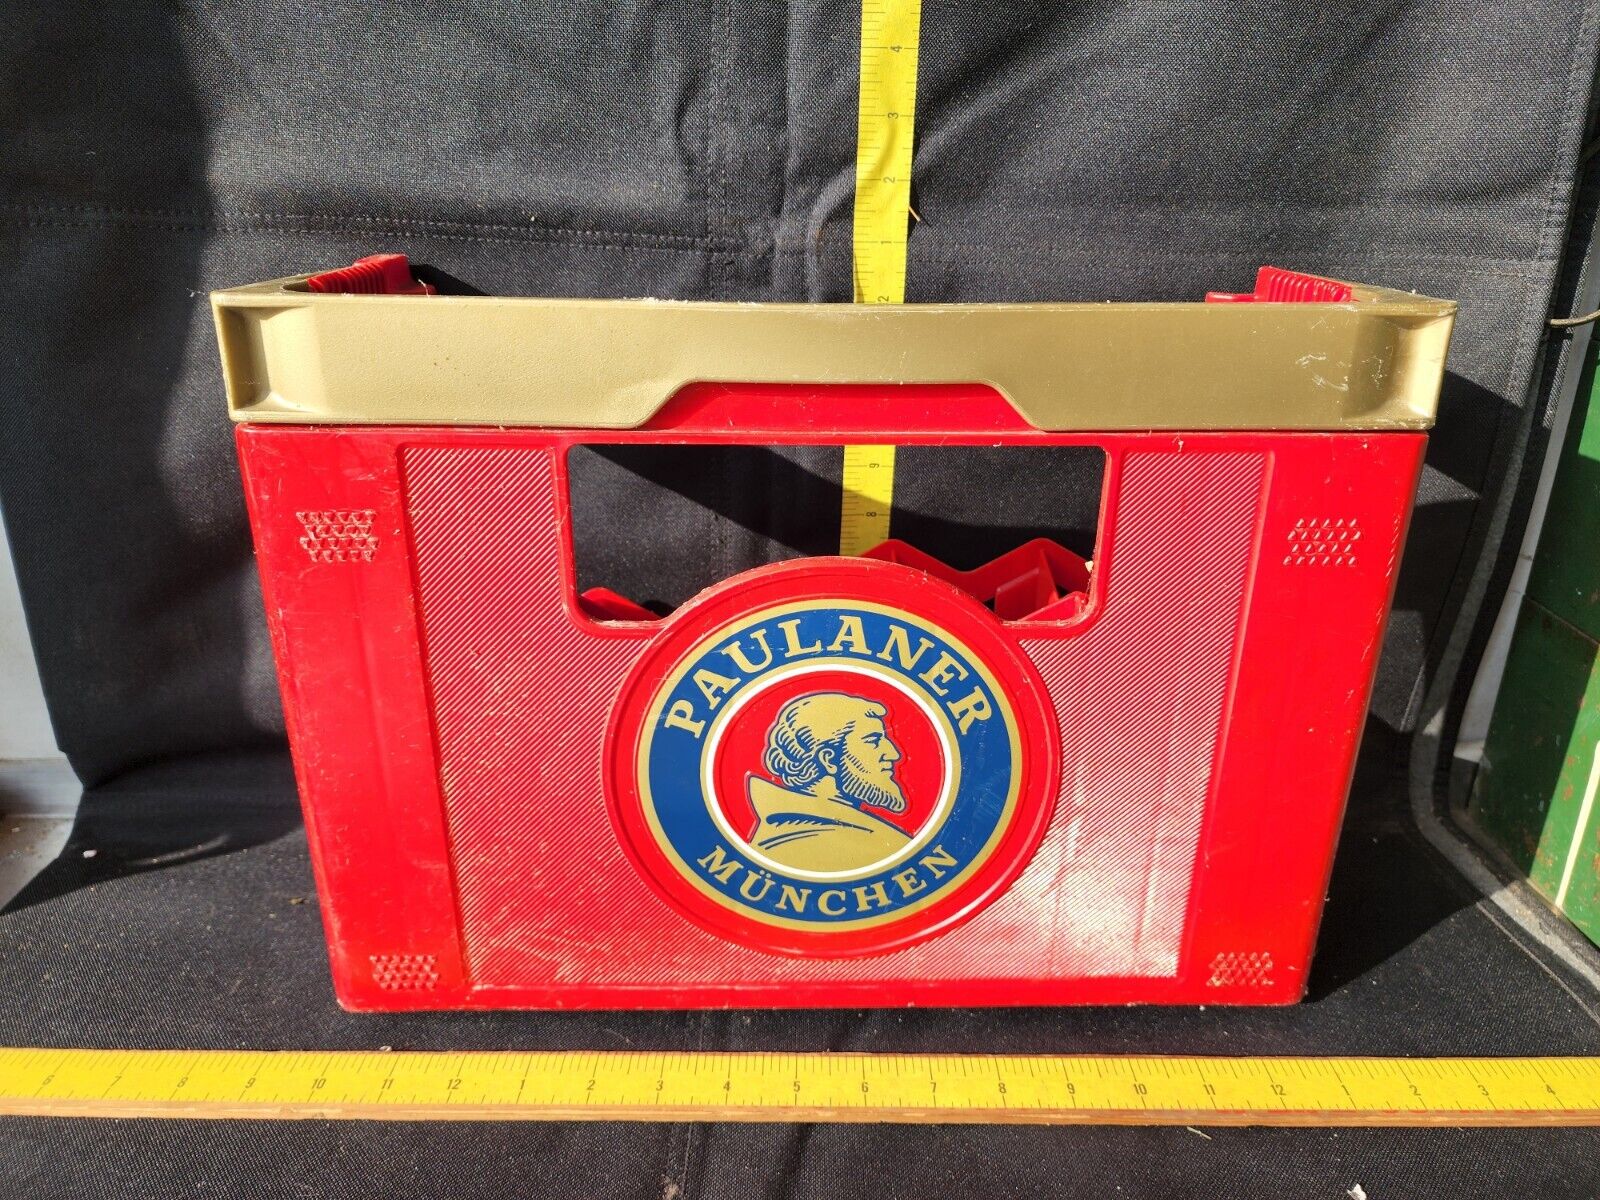 Vintage Paulaner Munchen Beer 10pack Beer Case Crate Box 2 Available